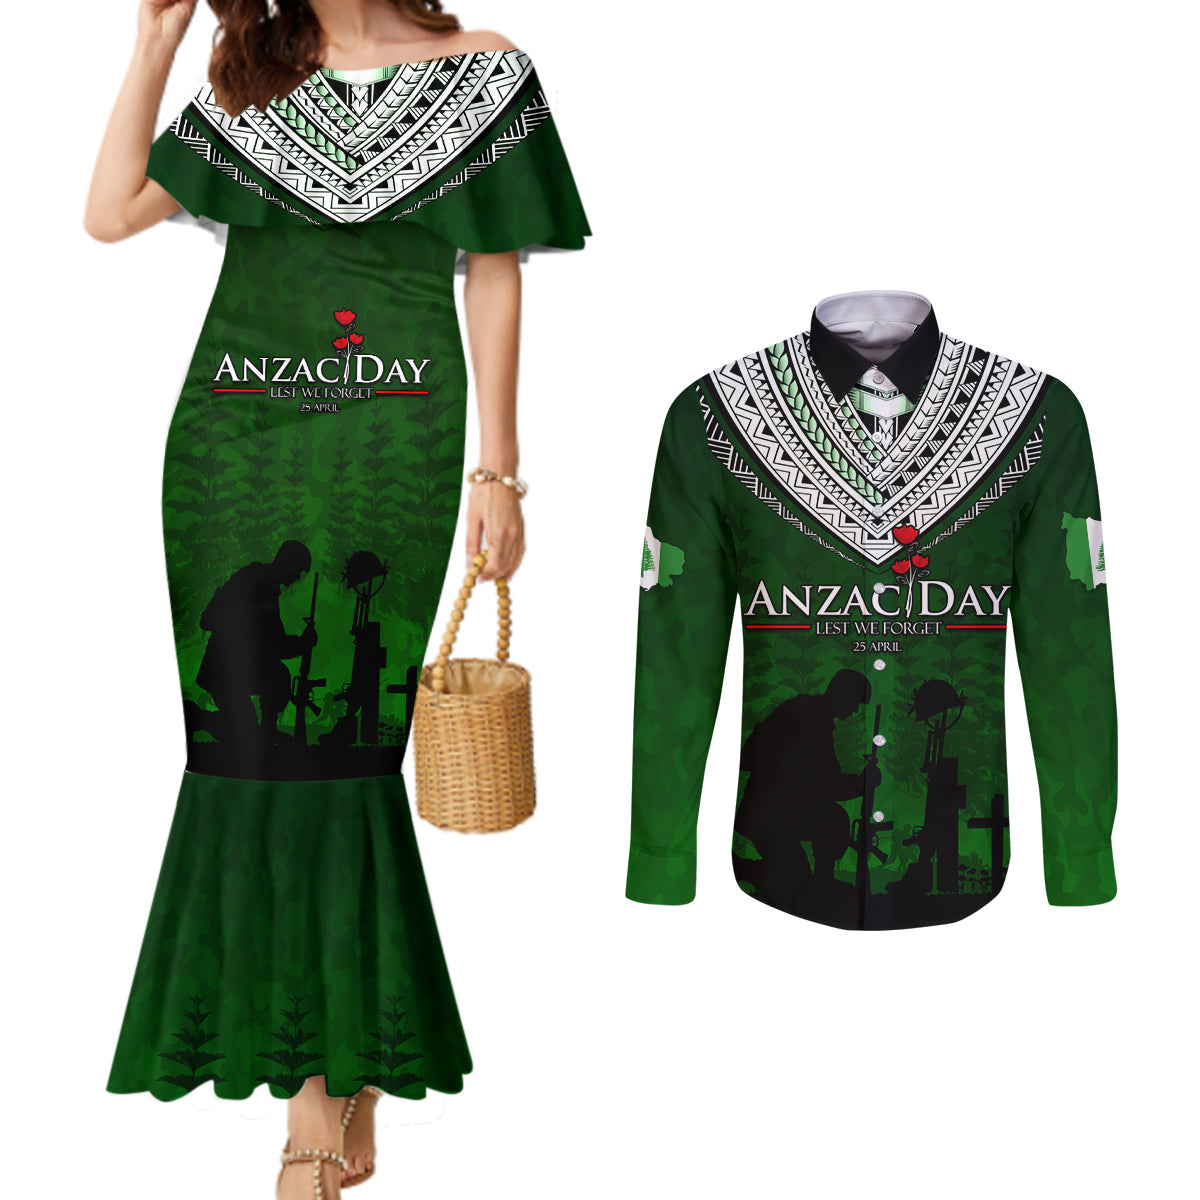 Norfolk Island ANZAC Day Couples Matching Mermaid Dress and Long Sleeve Button Shirt Soldier Lest We Forget Camouflage LT03 Green - Polynesian Pride